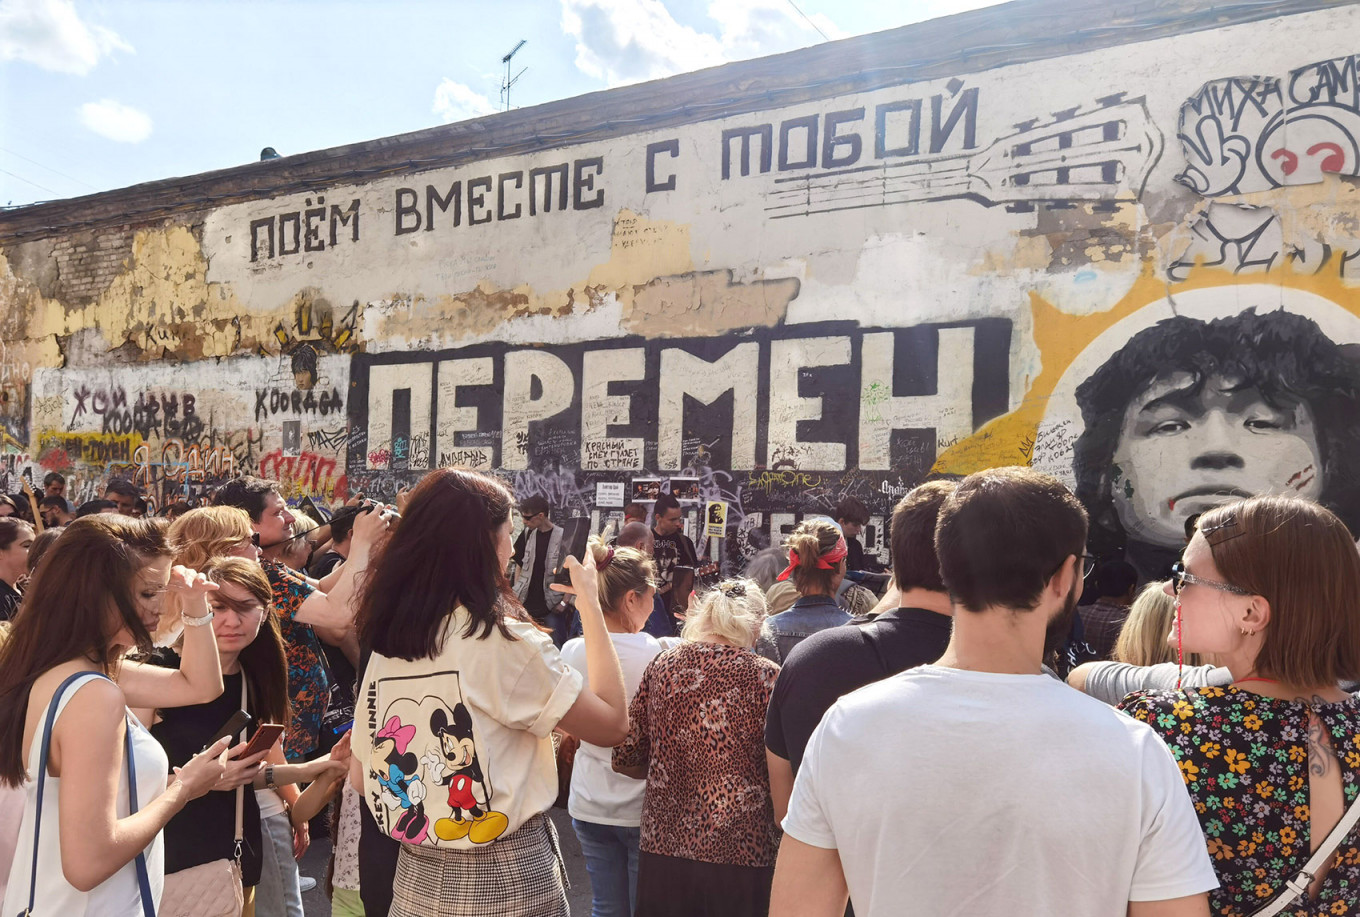 In Photos: Paying Tribute to Kino Frontman Viktor Tsoi - The Moscow Times